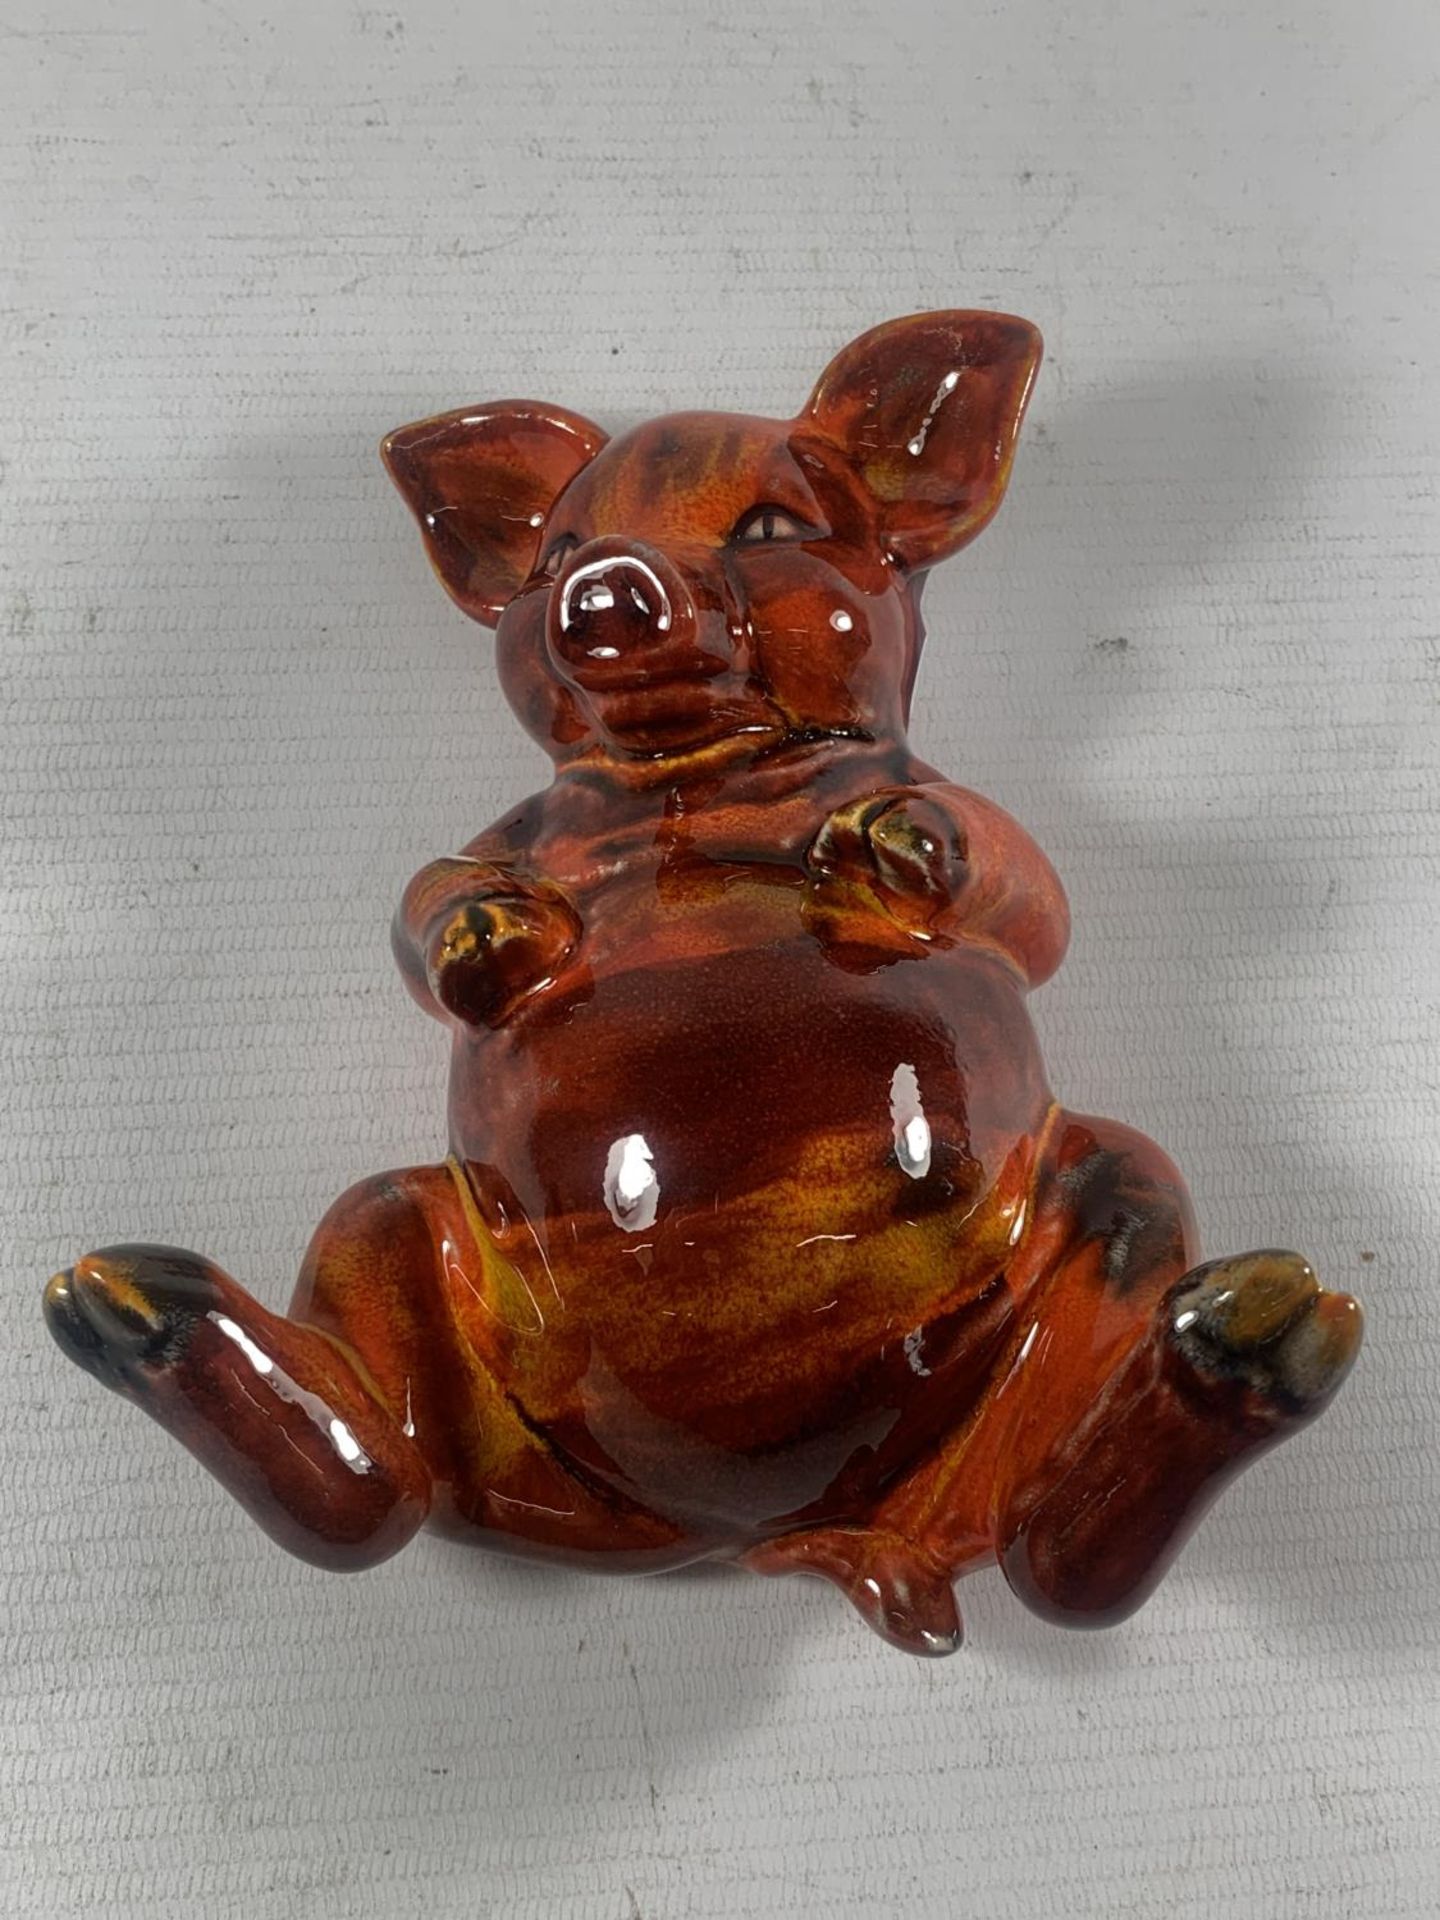 AN ANITA HARRIS HAND PAINTED AND SIGNED IN GOLD LYING DOWN PIG